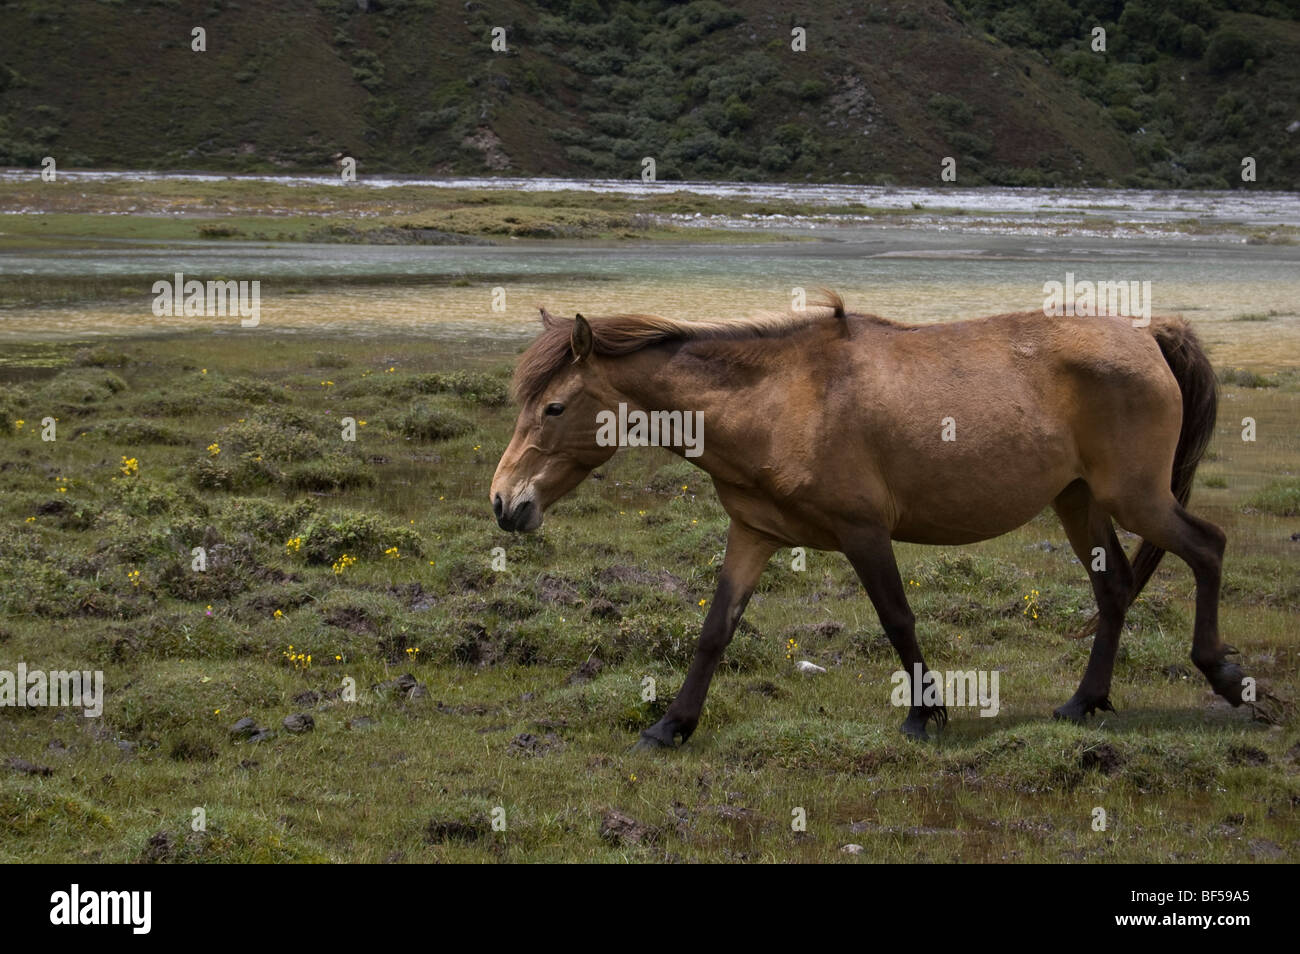 A horse walking through a field by a river and moraine near Kyanjin Gompa in the Langtang Valley, Nepal. Stock Photo